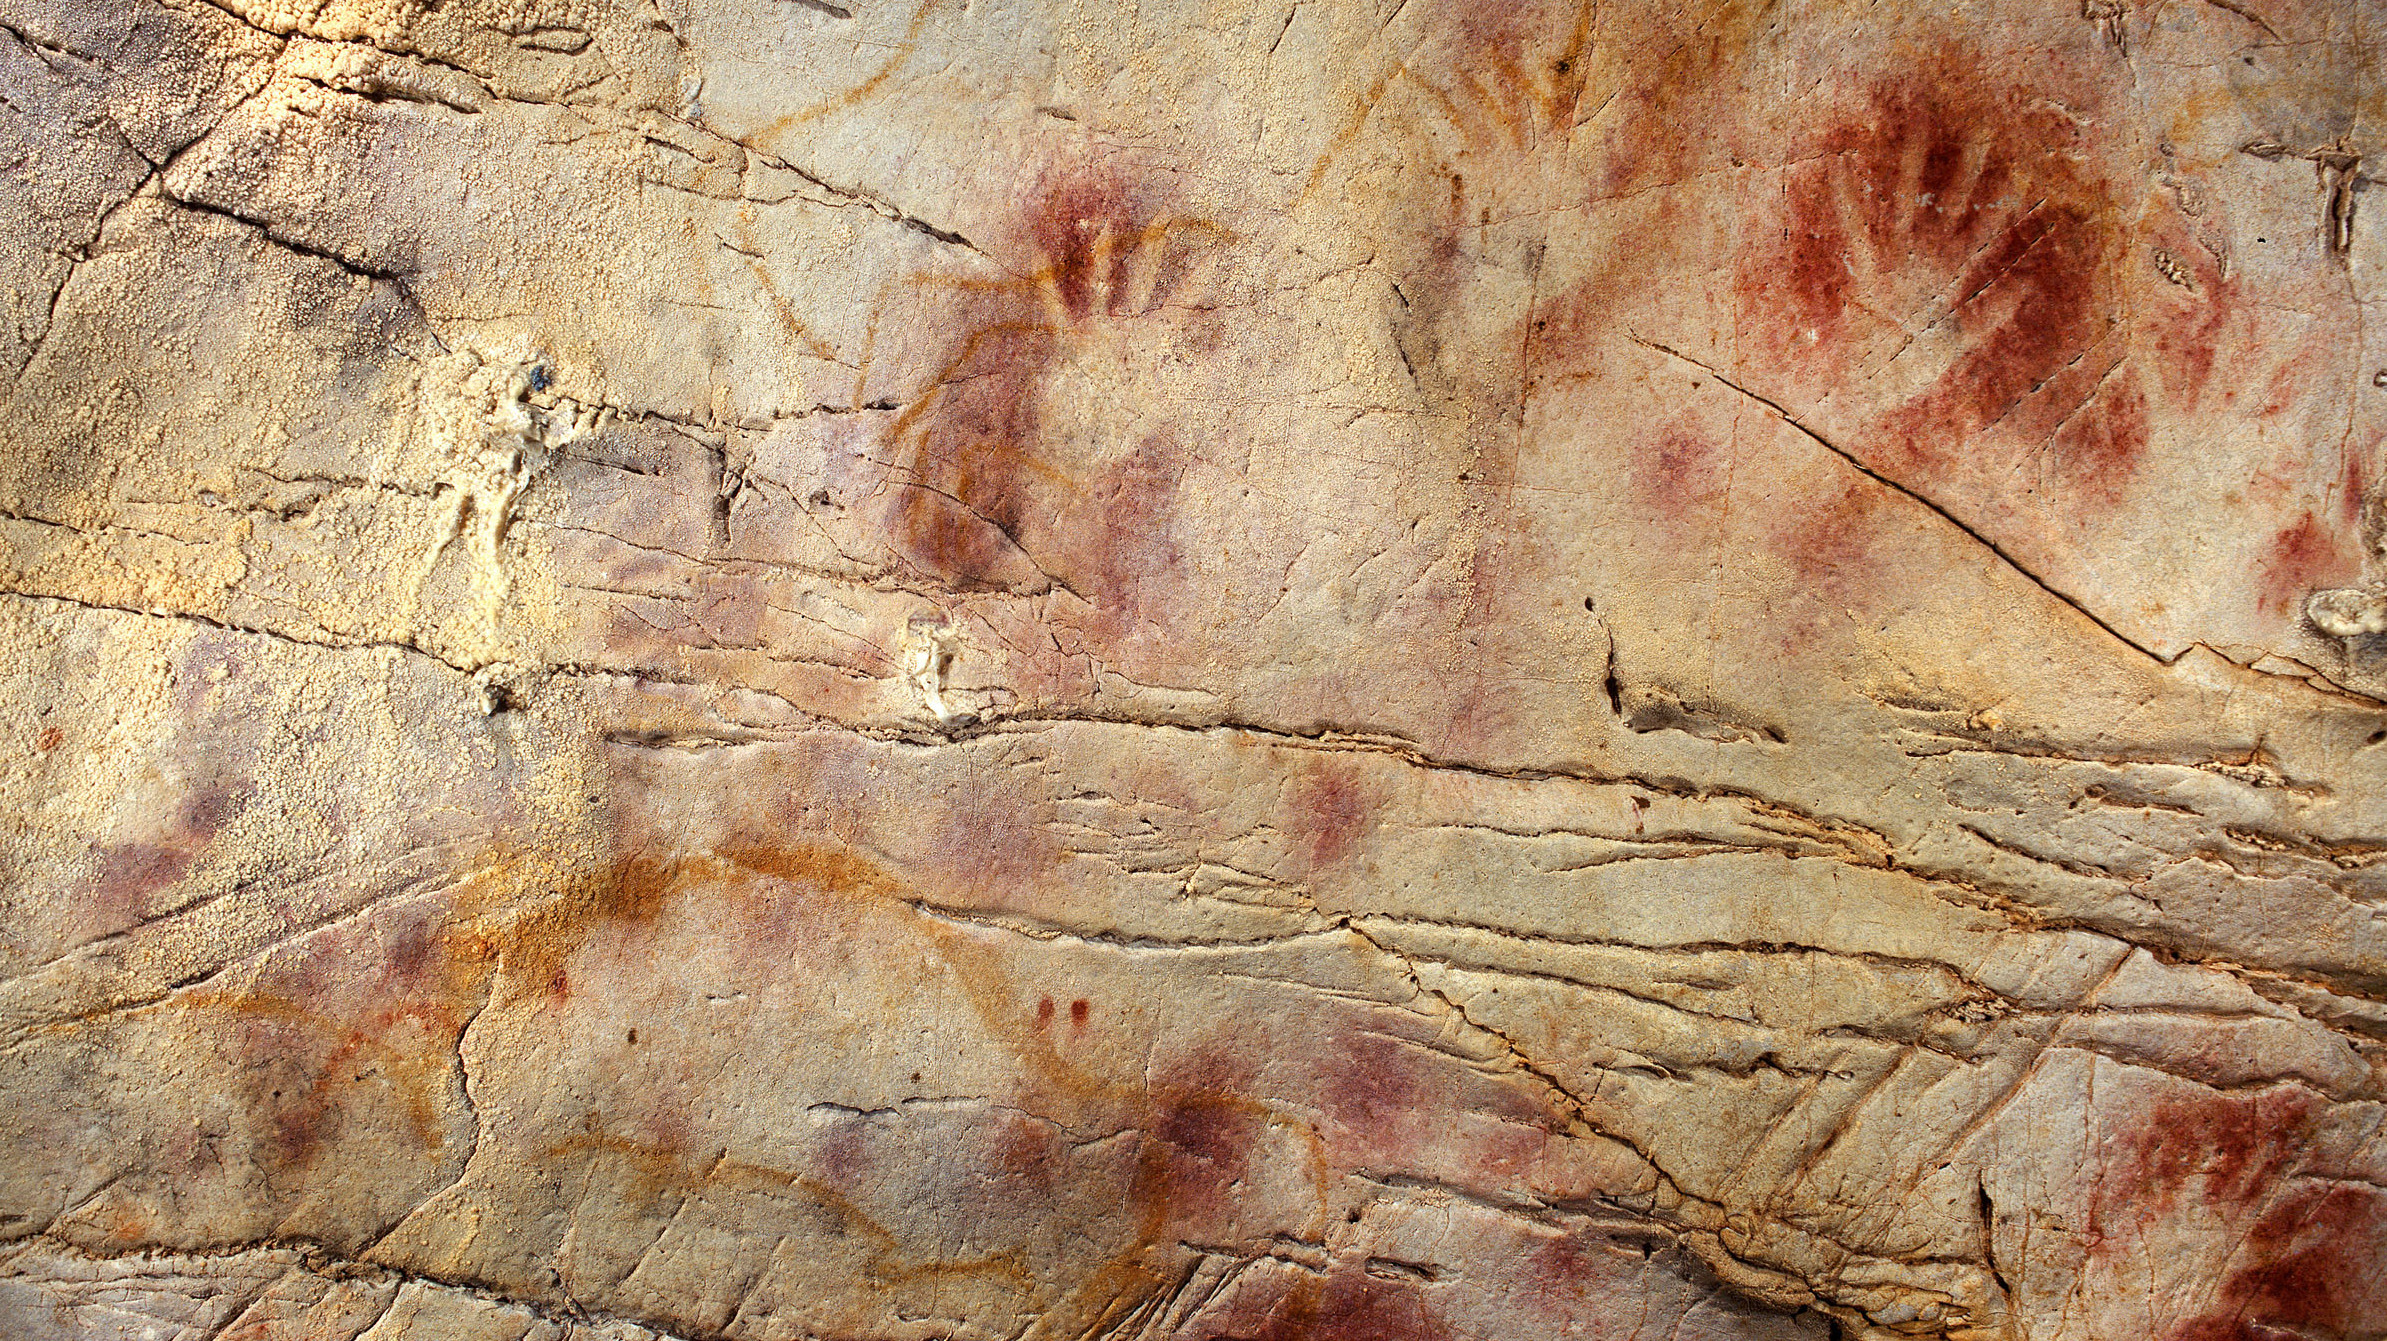 Famous Cave Paintings Might Not Be From Humans Npr